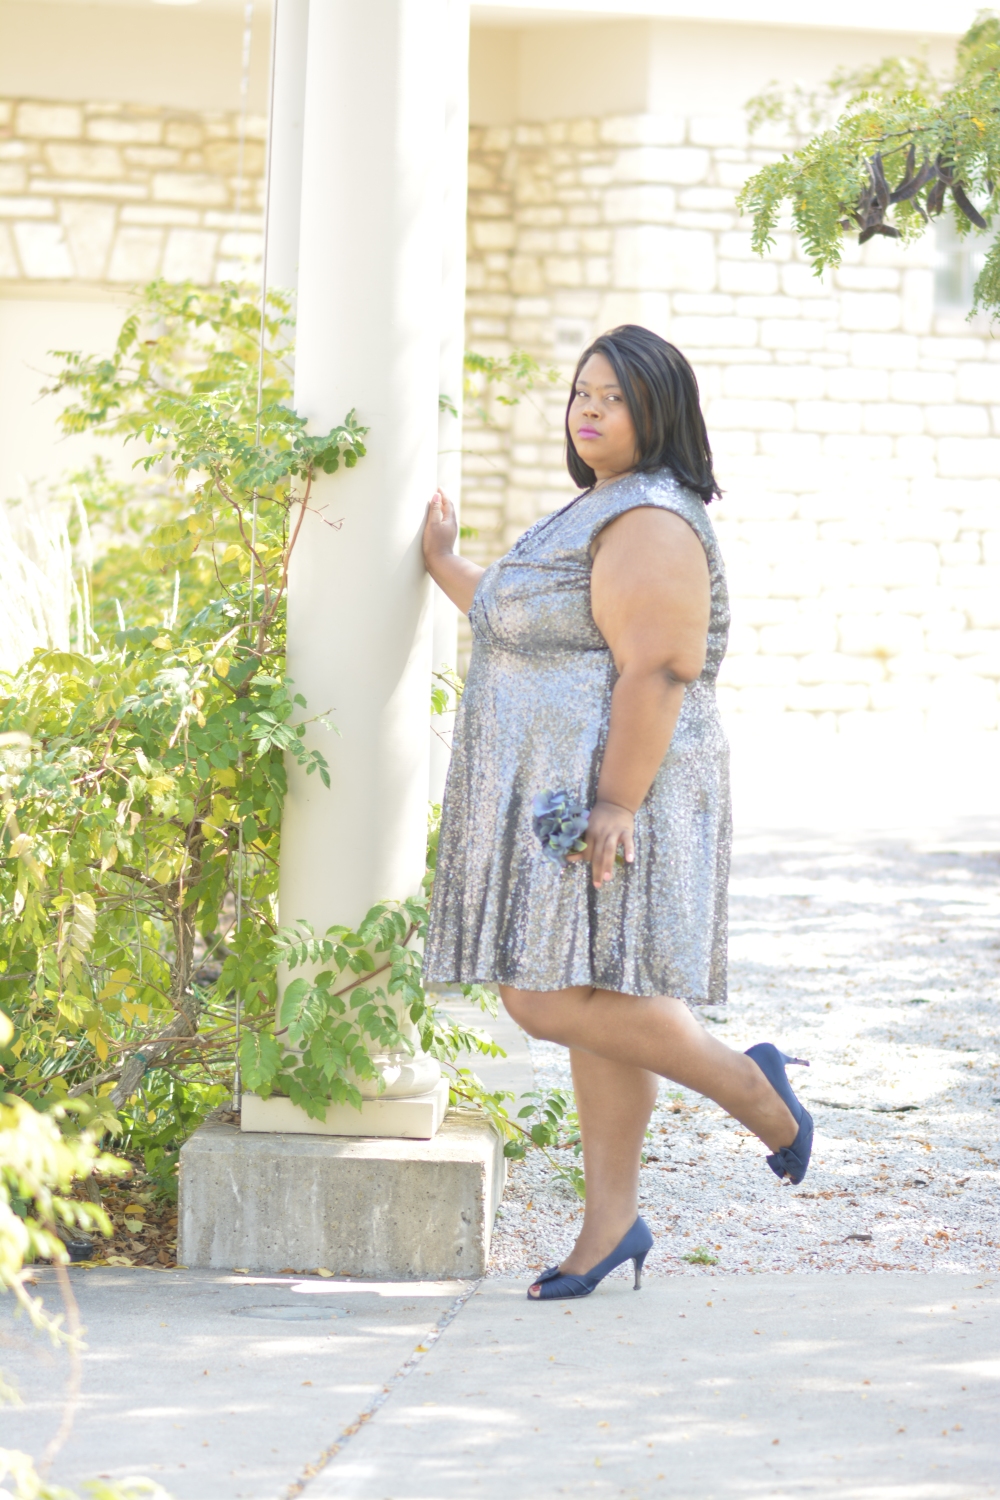 http://finessecurves.com Sydney's Closet had plus size formal wear up to size 40. Their dresses are perfect for prom, homecoming,weddings, bridesmaids, pageants or any formal event.